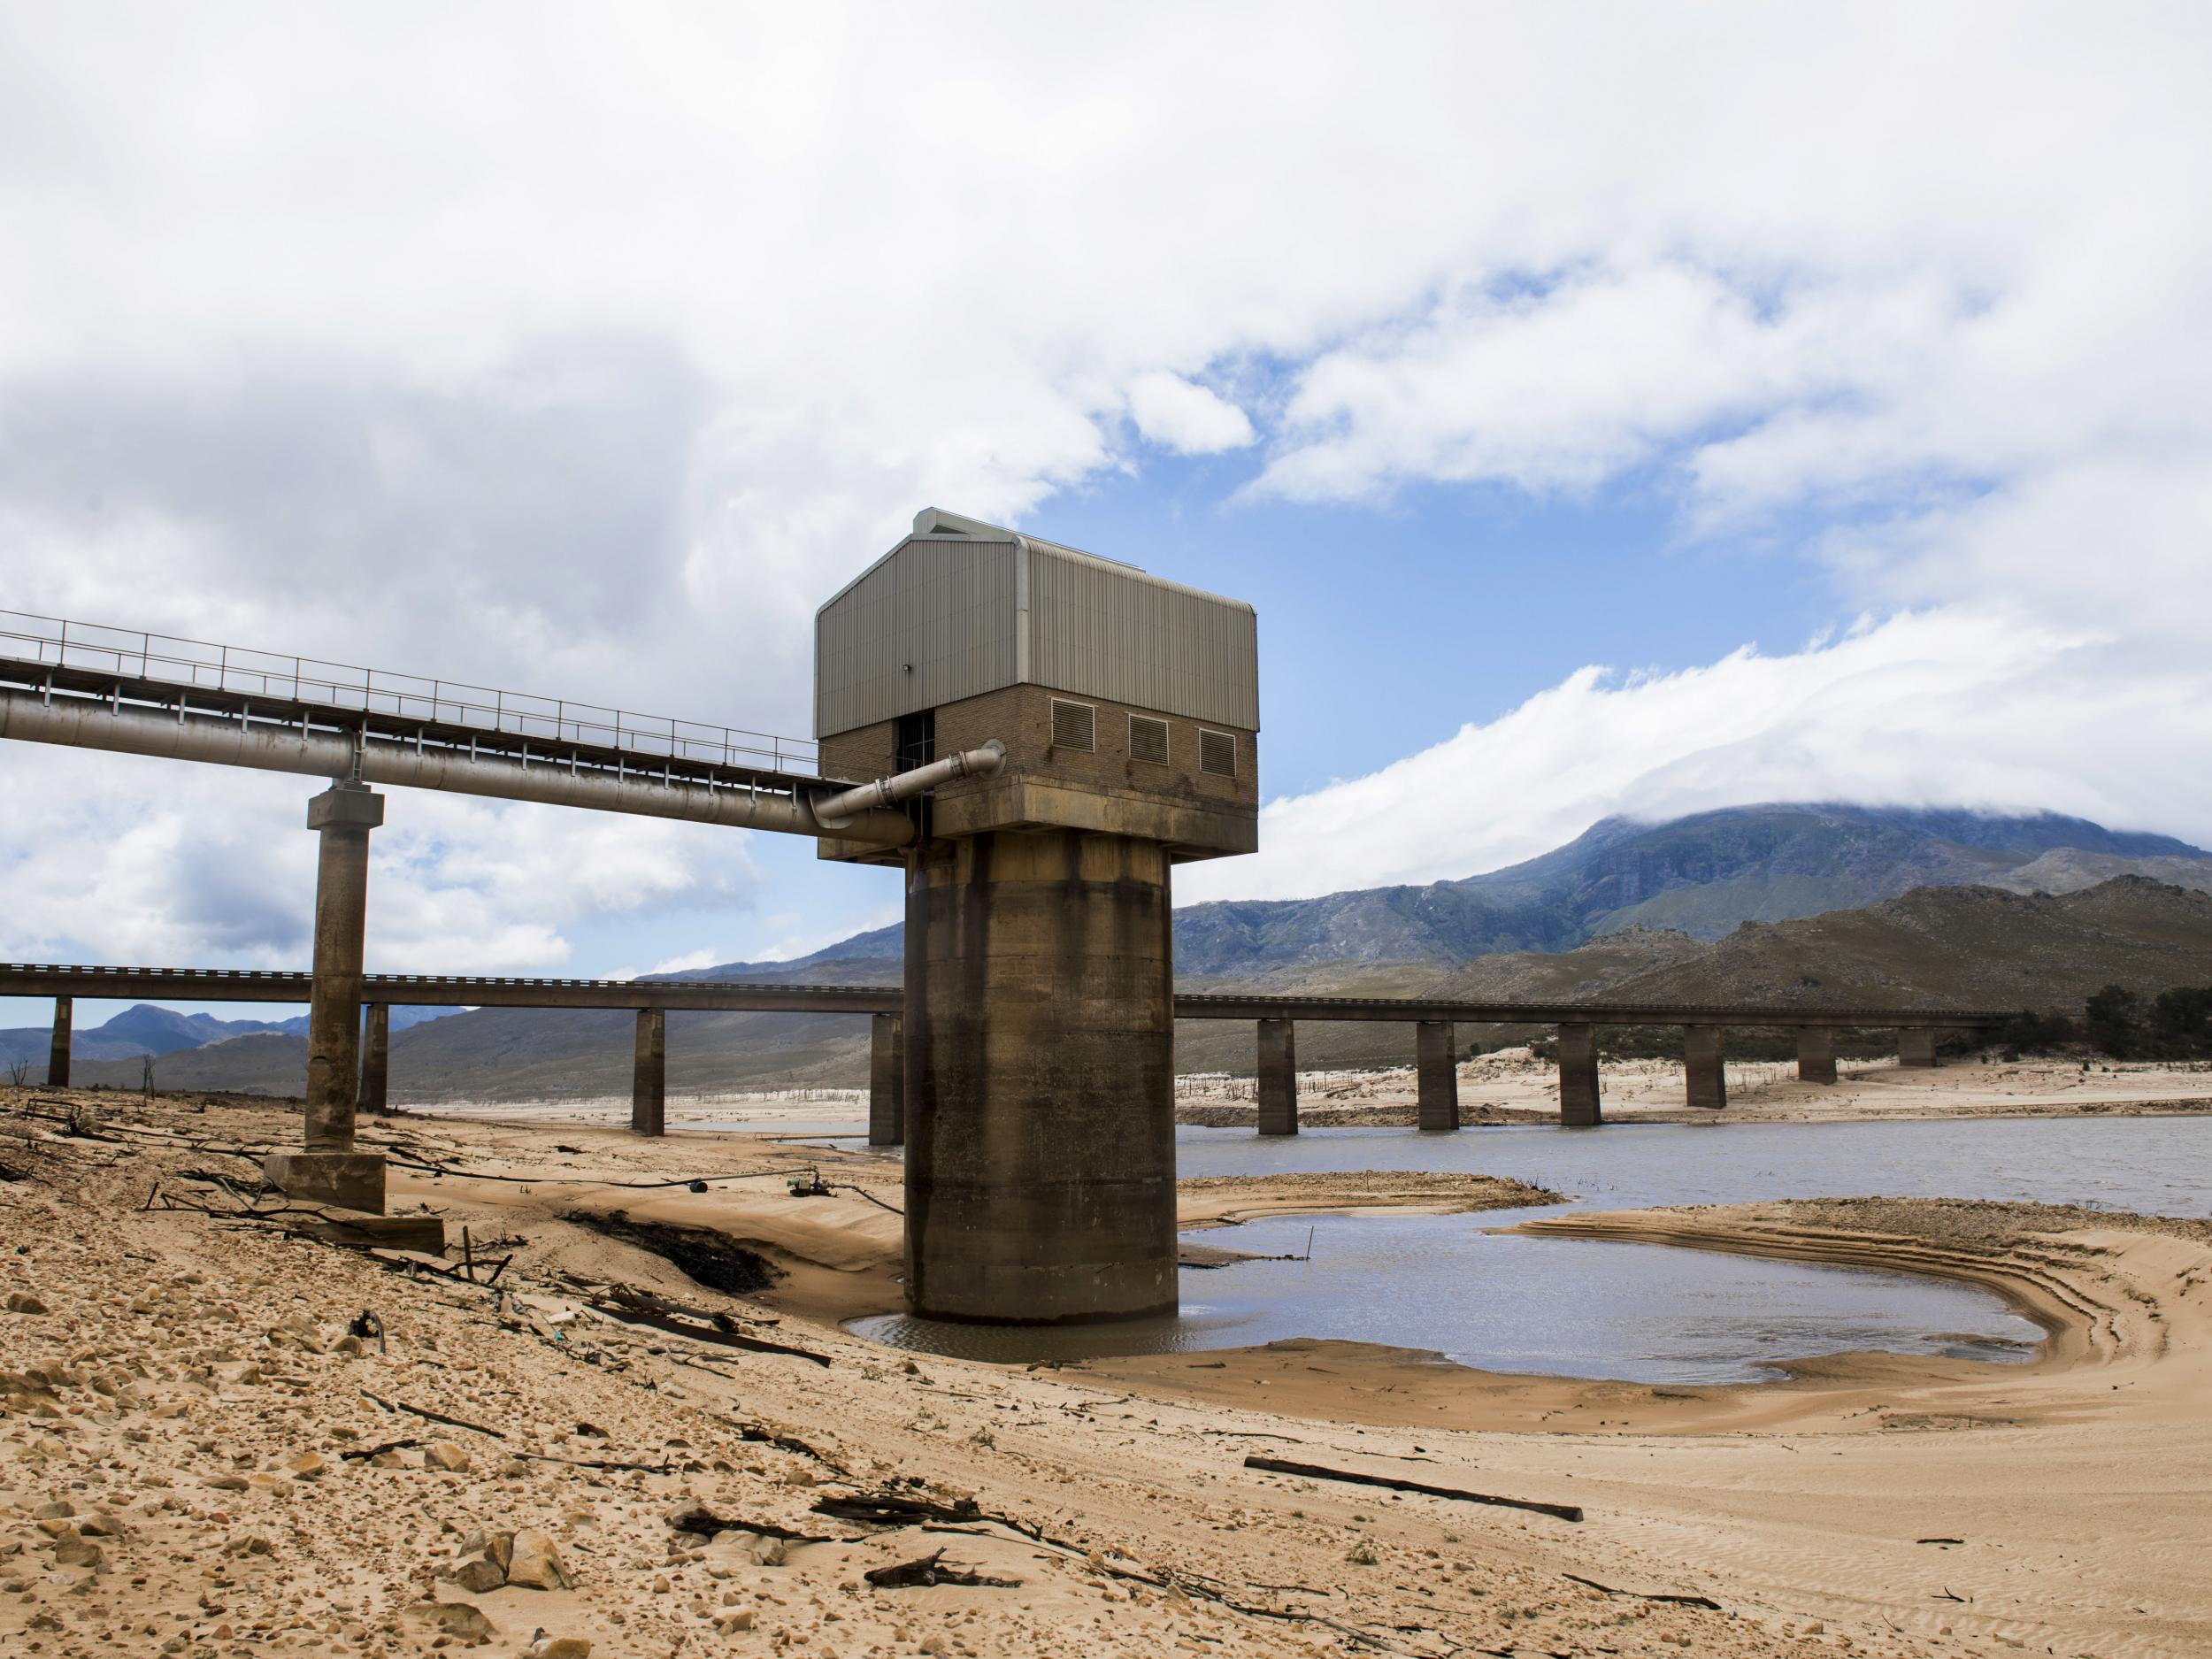 The Theewaterskloof dam is currently so low that it could force Cape Town to turn off most of its taps